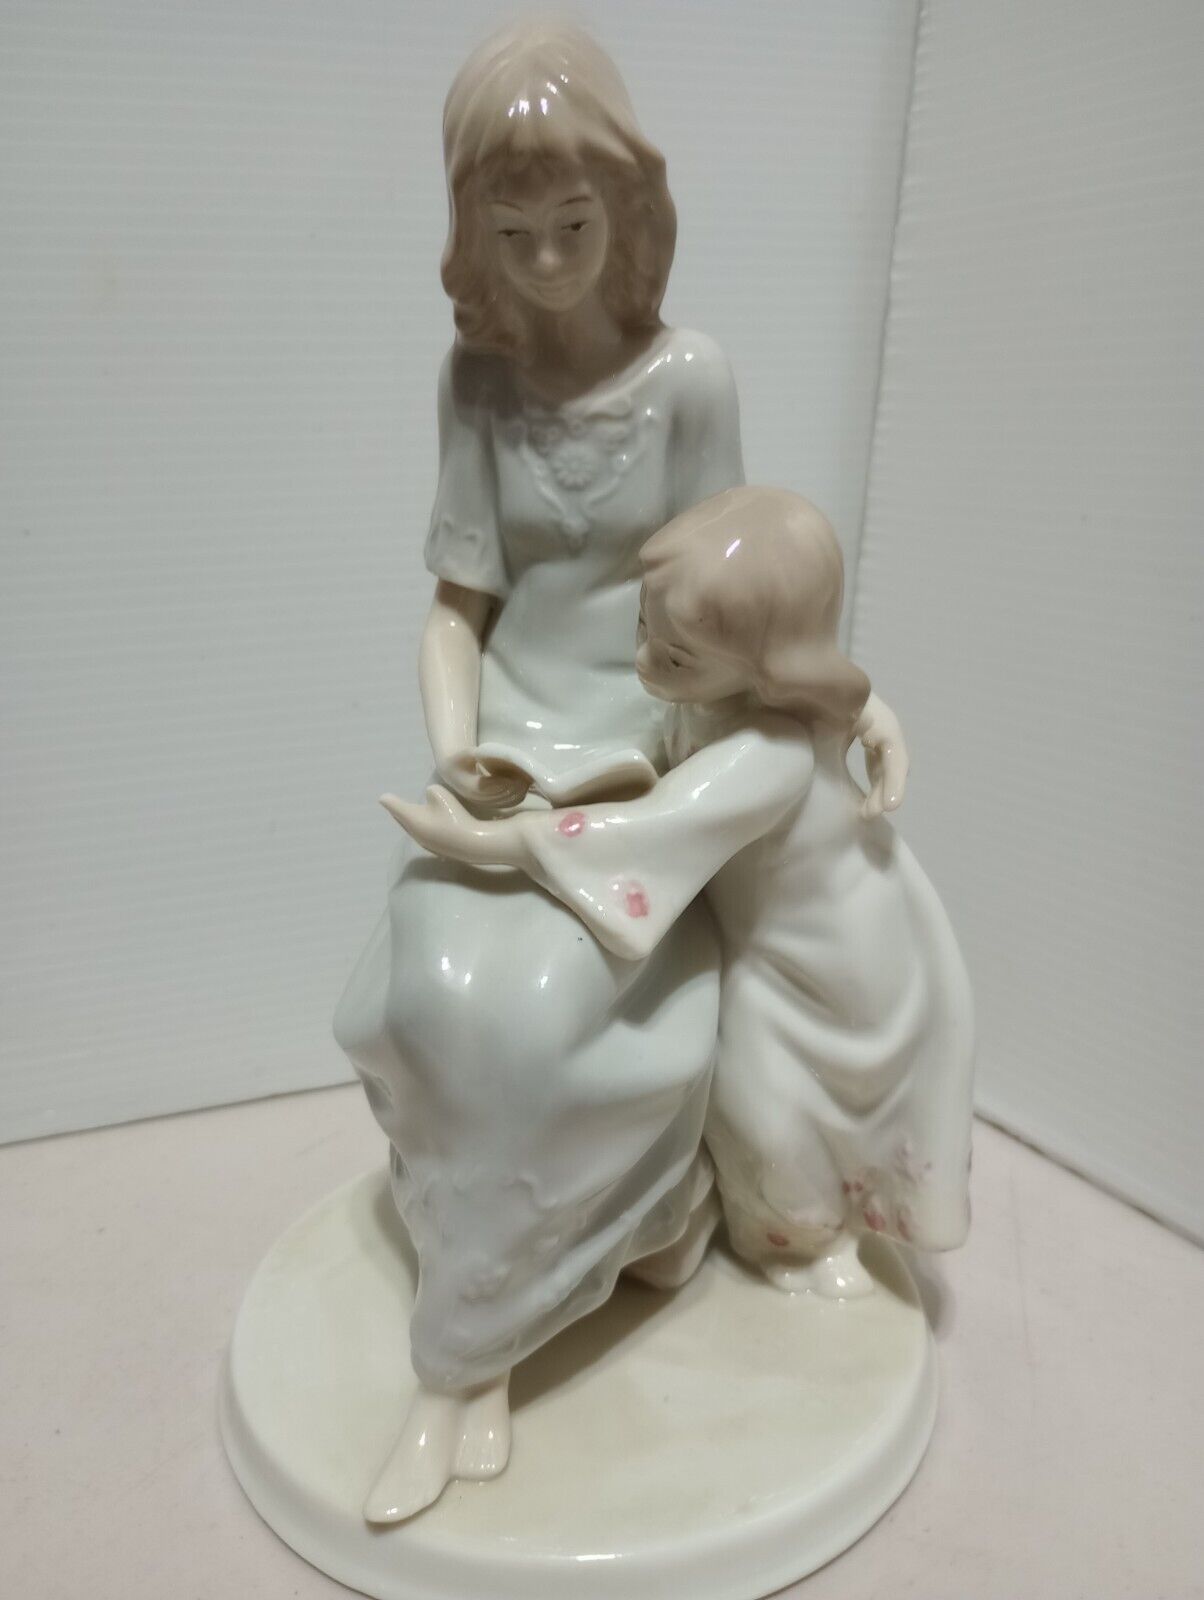 Vintage Meico Inc. Porcelain Figurine Mother and Child Storytime